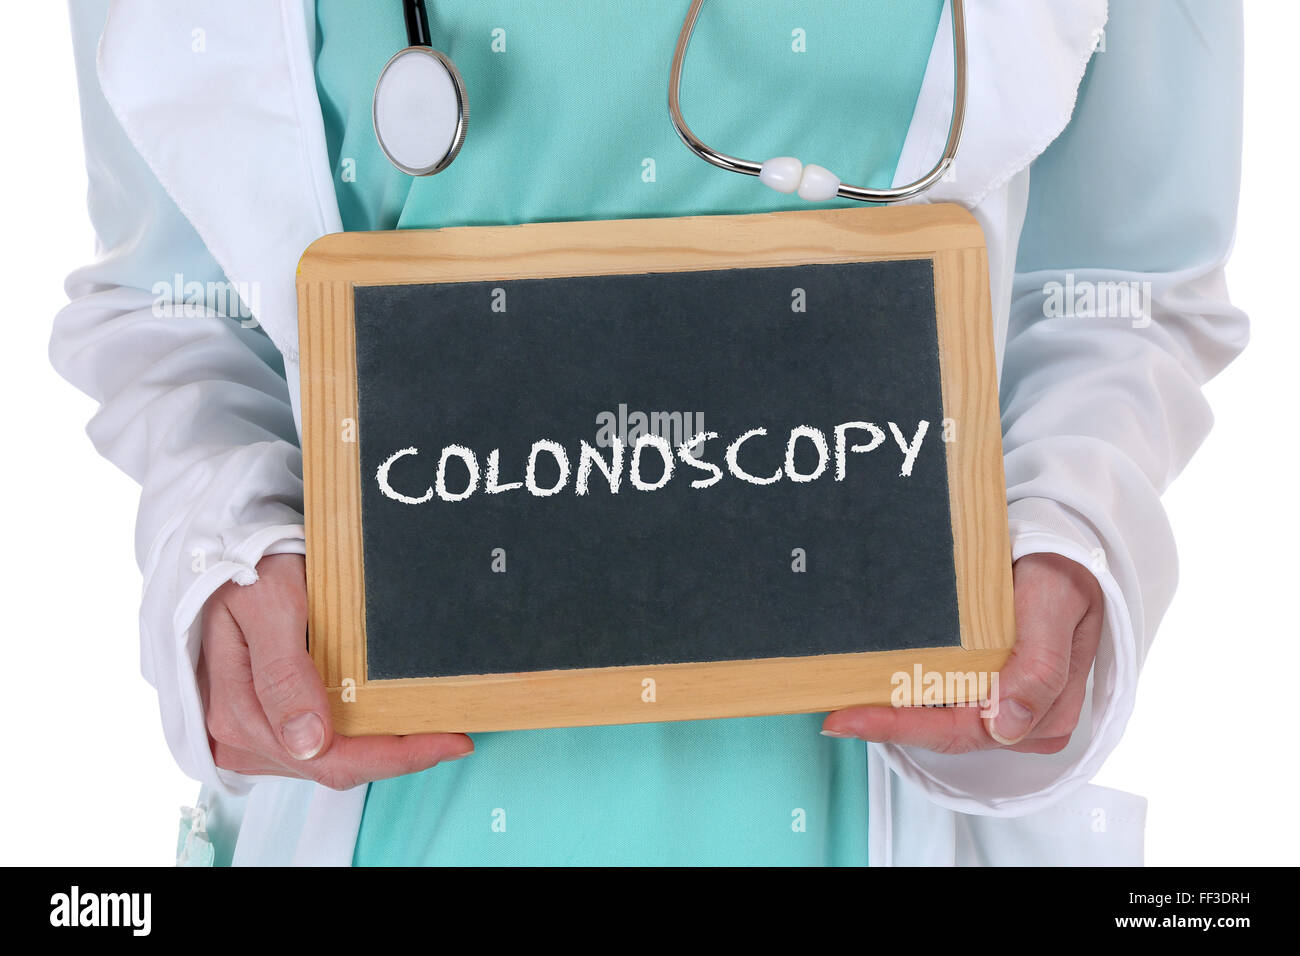 Colonoscopy cancer prevention screening check-up disease ill illness doctor with sign Stock Photo